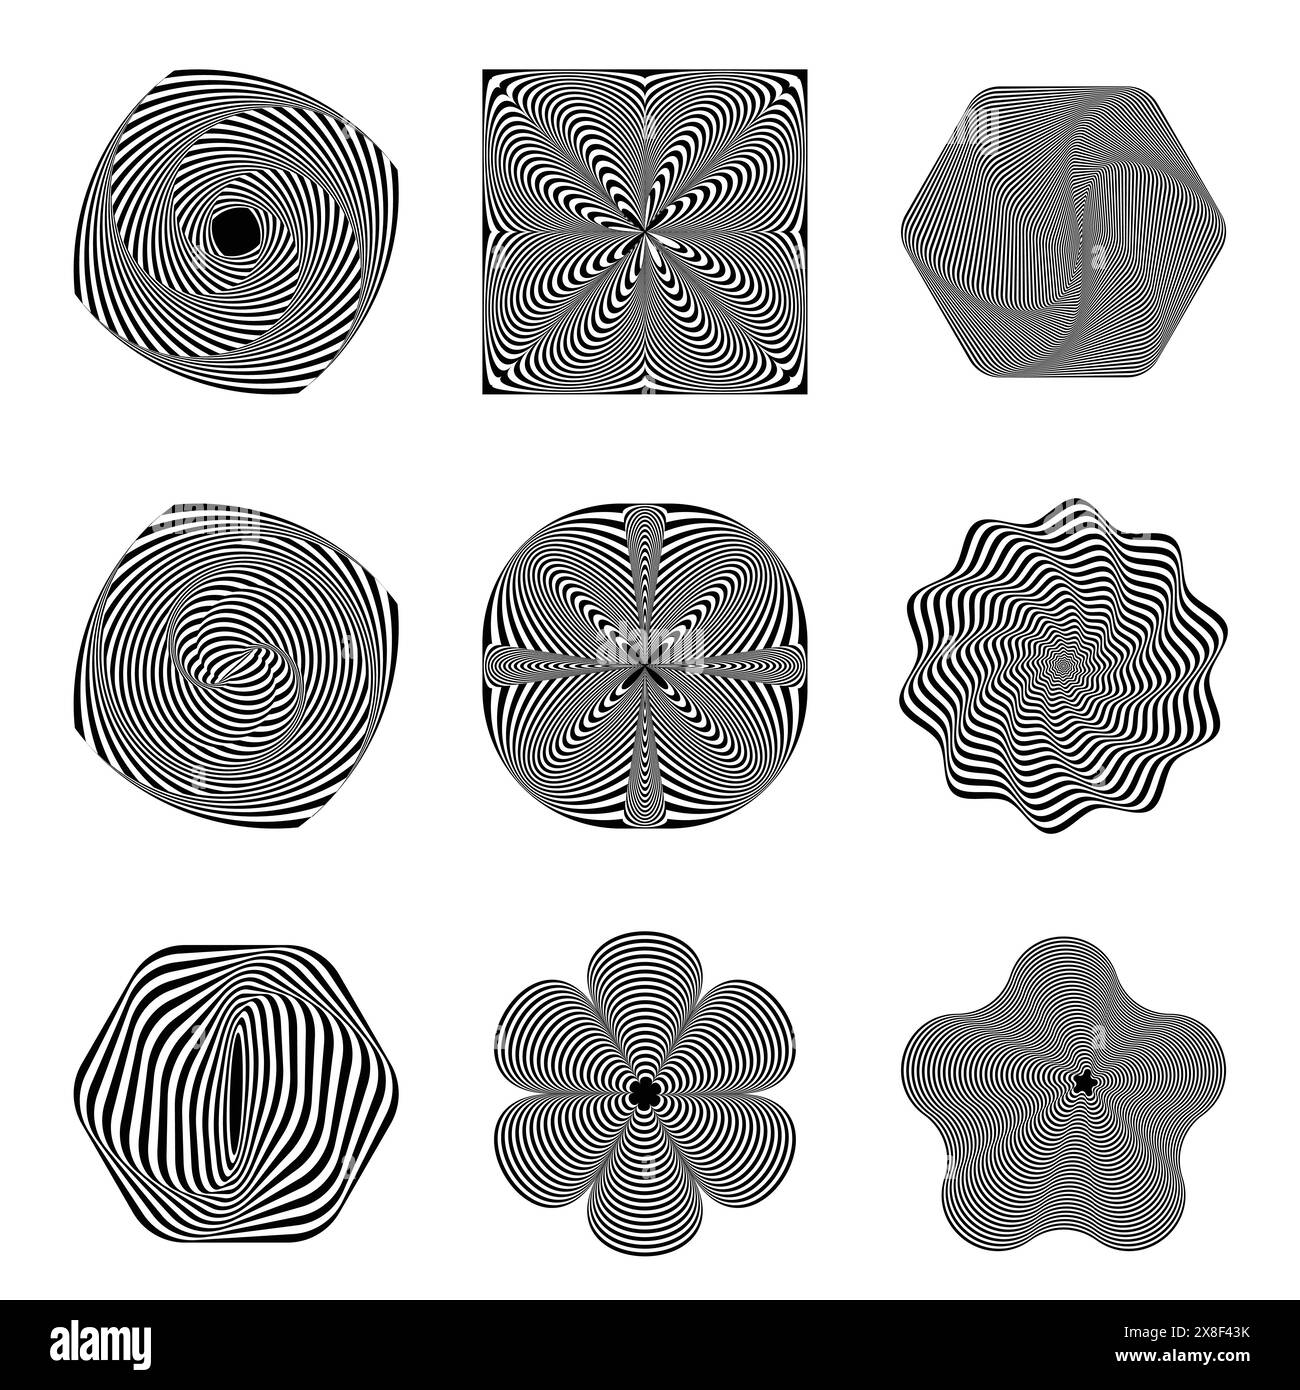 Set of 9 hypnotic designs showcases a harmonious blend of precision and fluidity, creating striking visual illusions. Stock Vector